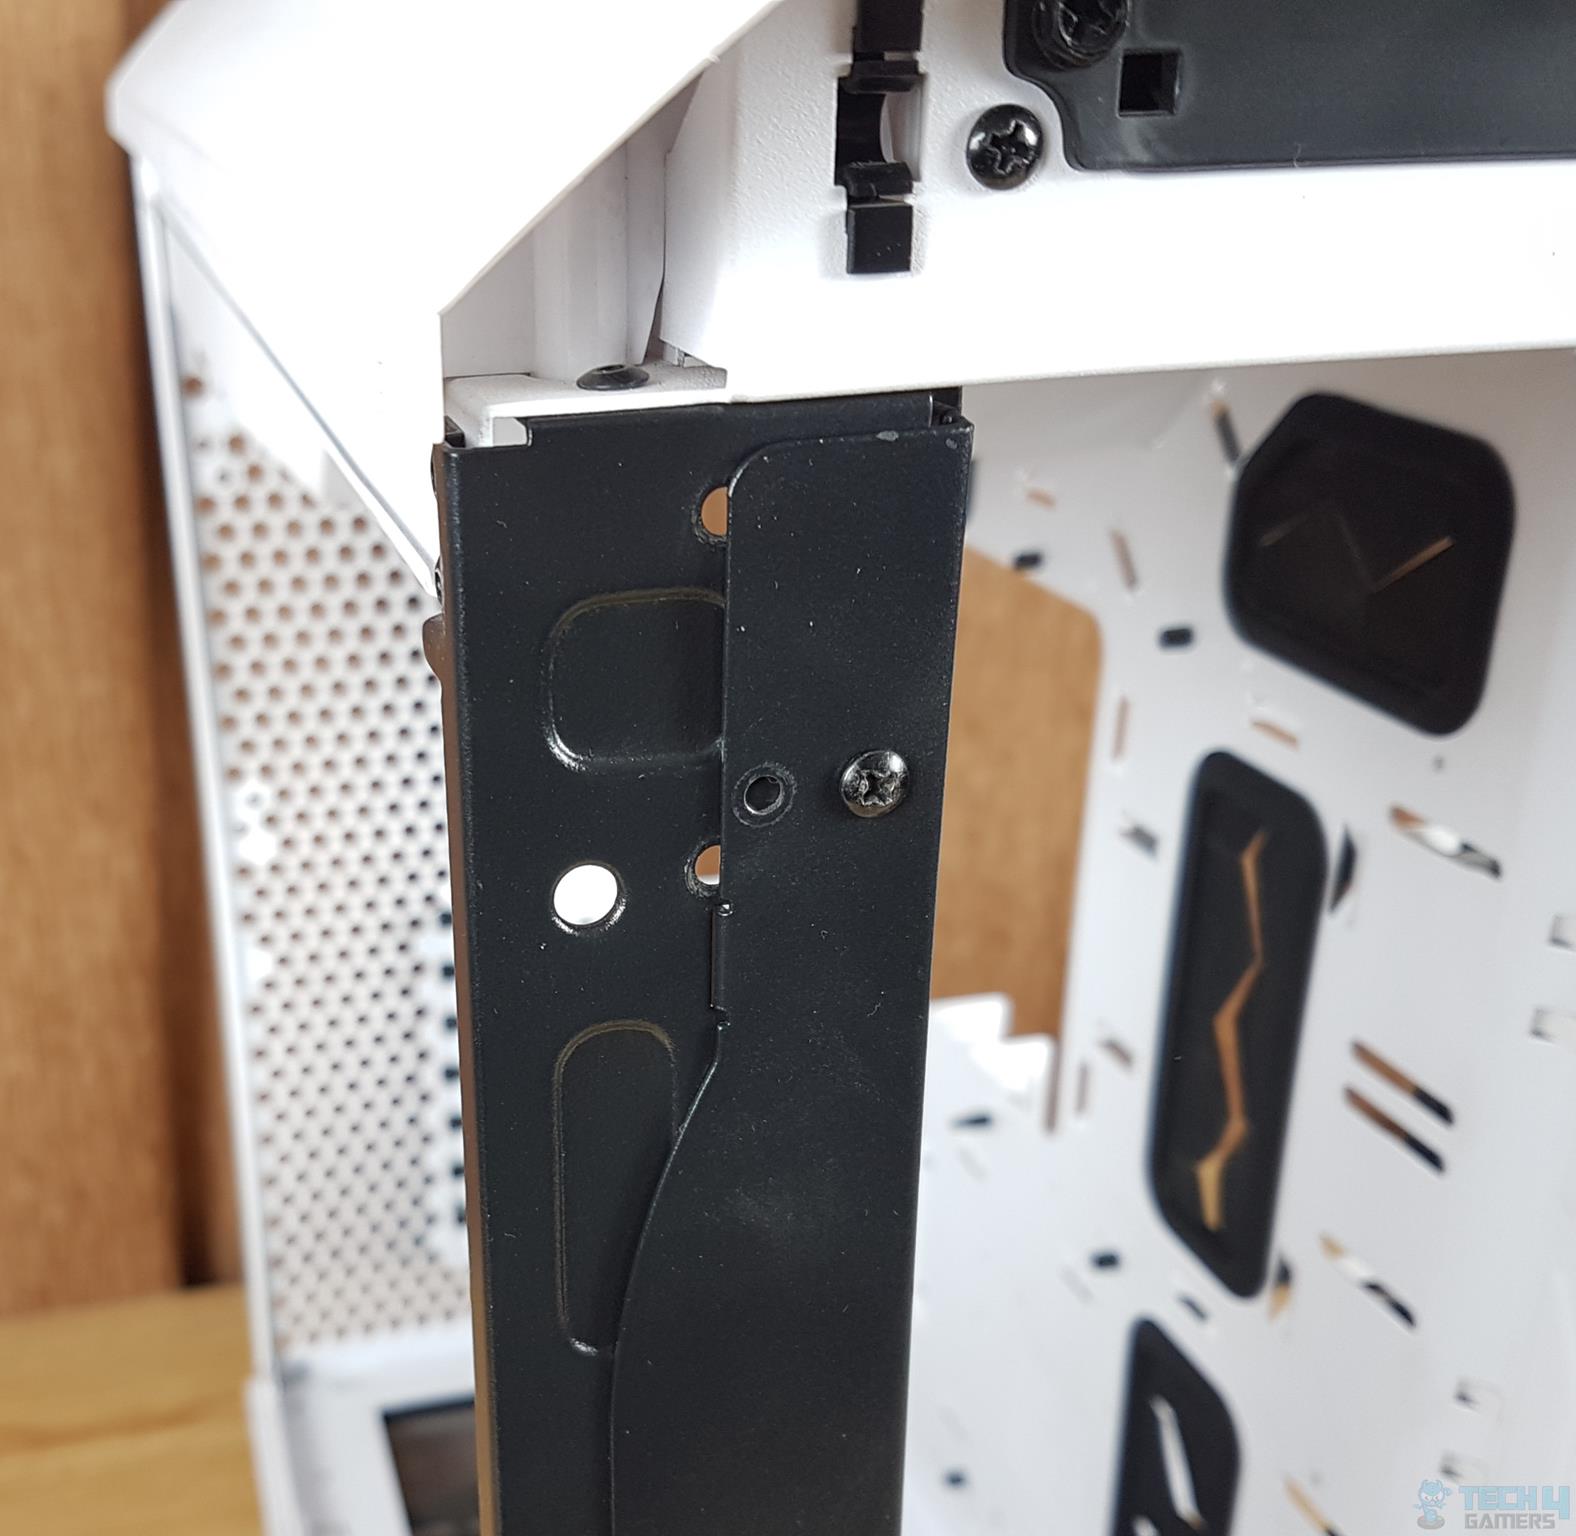 Fractal Design Torrent White TG Clear Tint PC Case — A closer look at the 140mm configuration fans bracket installation